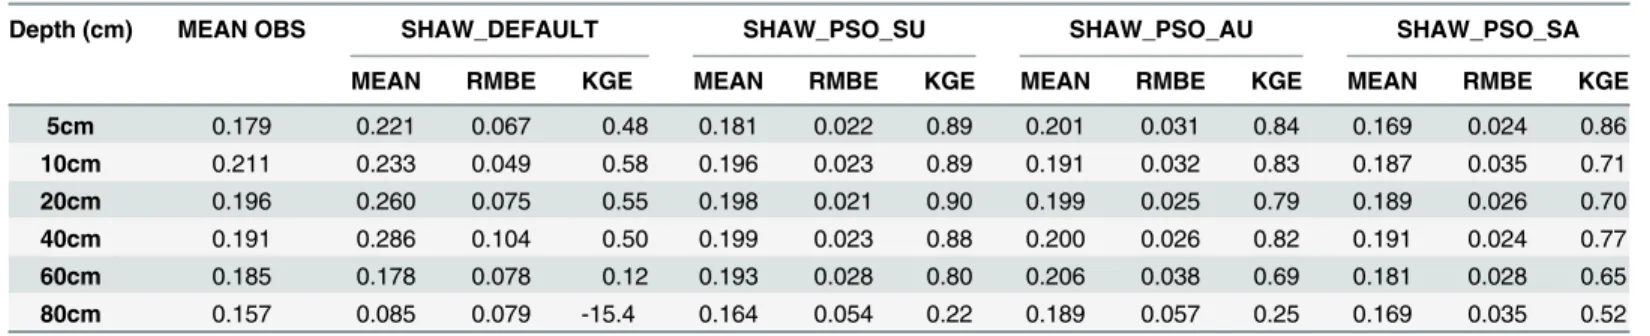 Table 4 summarizes parameters optimized based upon different datasets. The table reveals that the different sets of parameters are not identical, whereas they all have the same order of magnitude